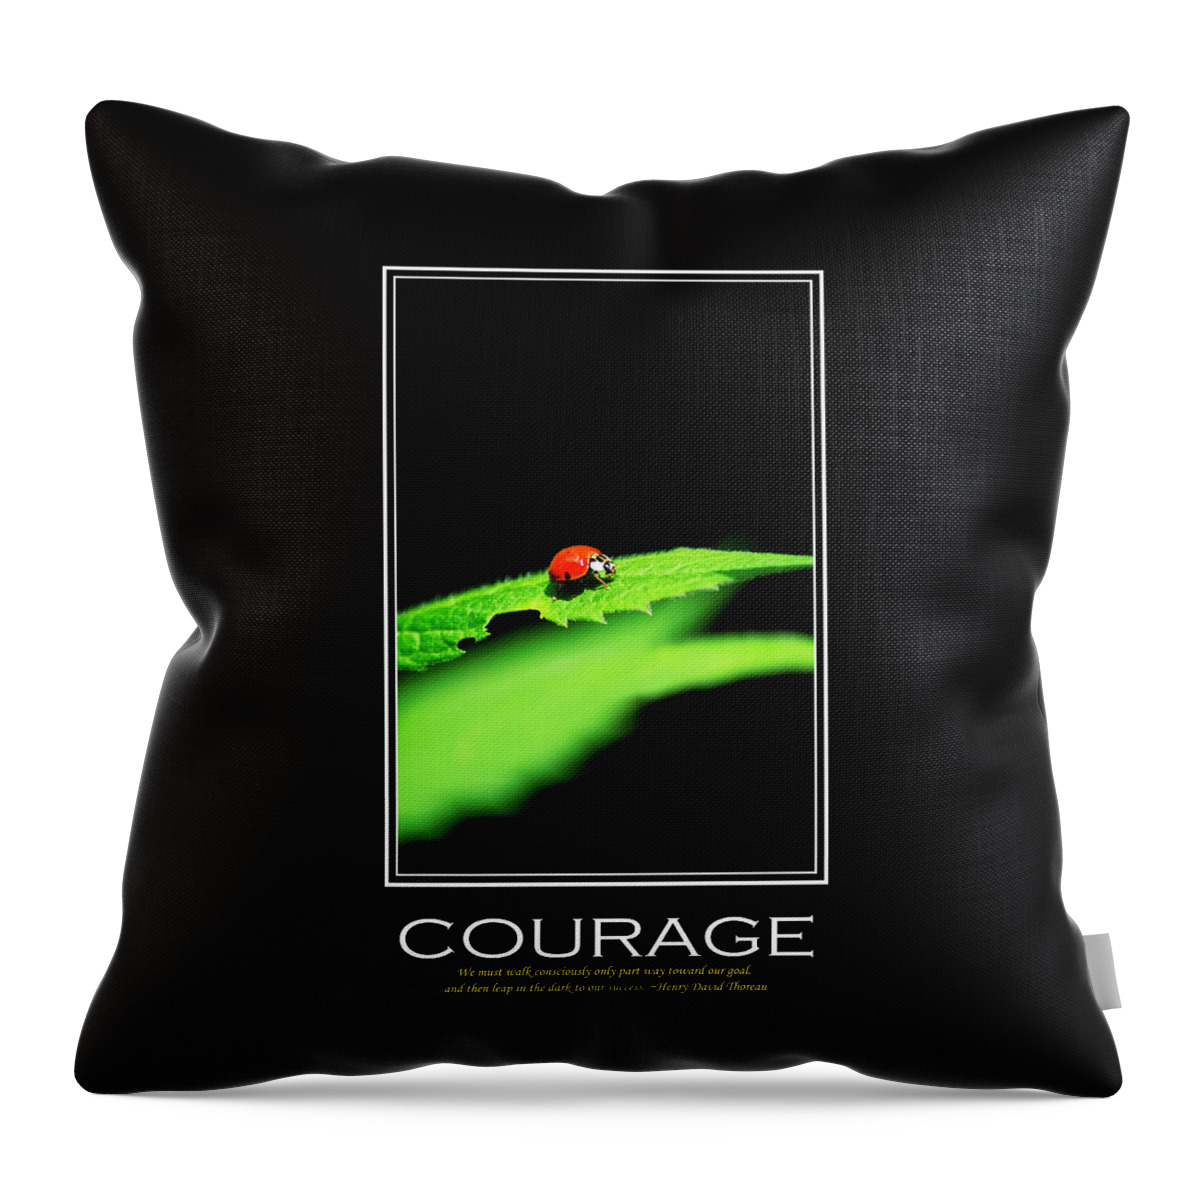 Inspiring Throw Pillow featuring the mixed media Courage Inspirational Motivational Poster Art by Christina Rollo